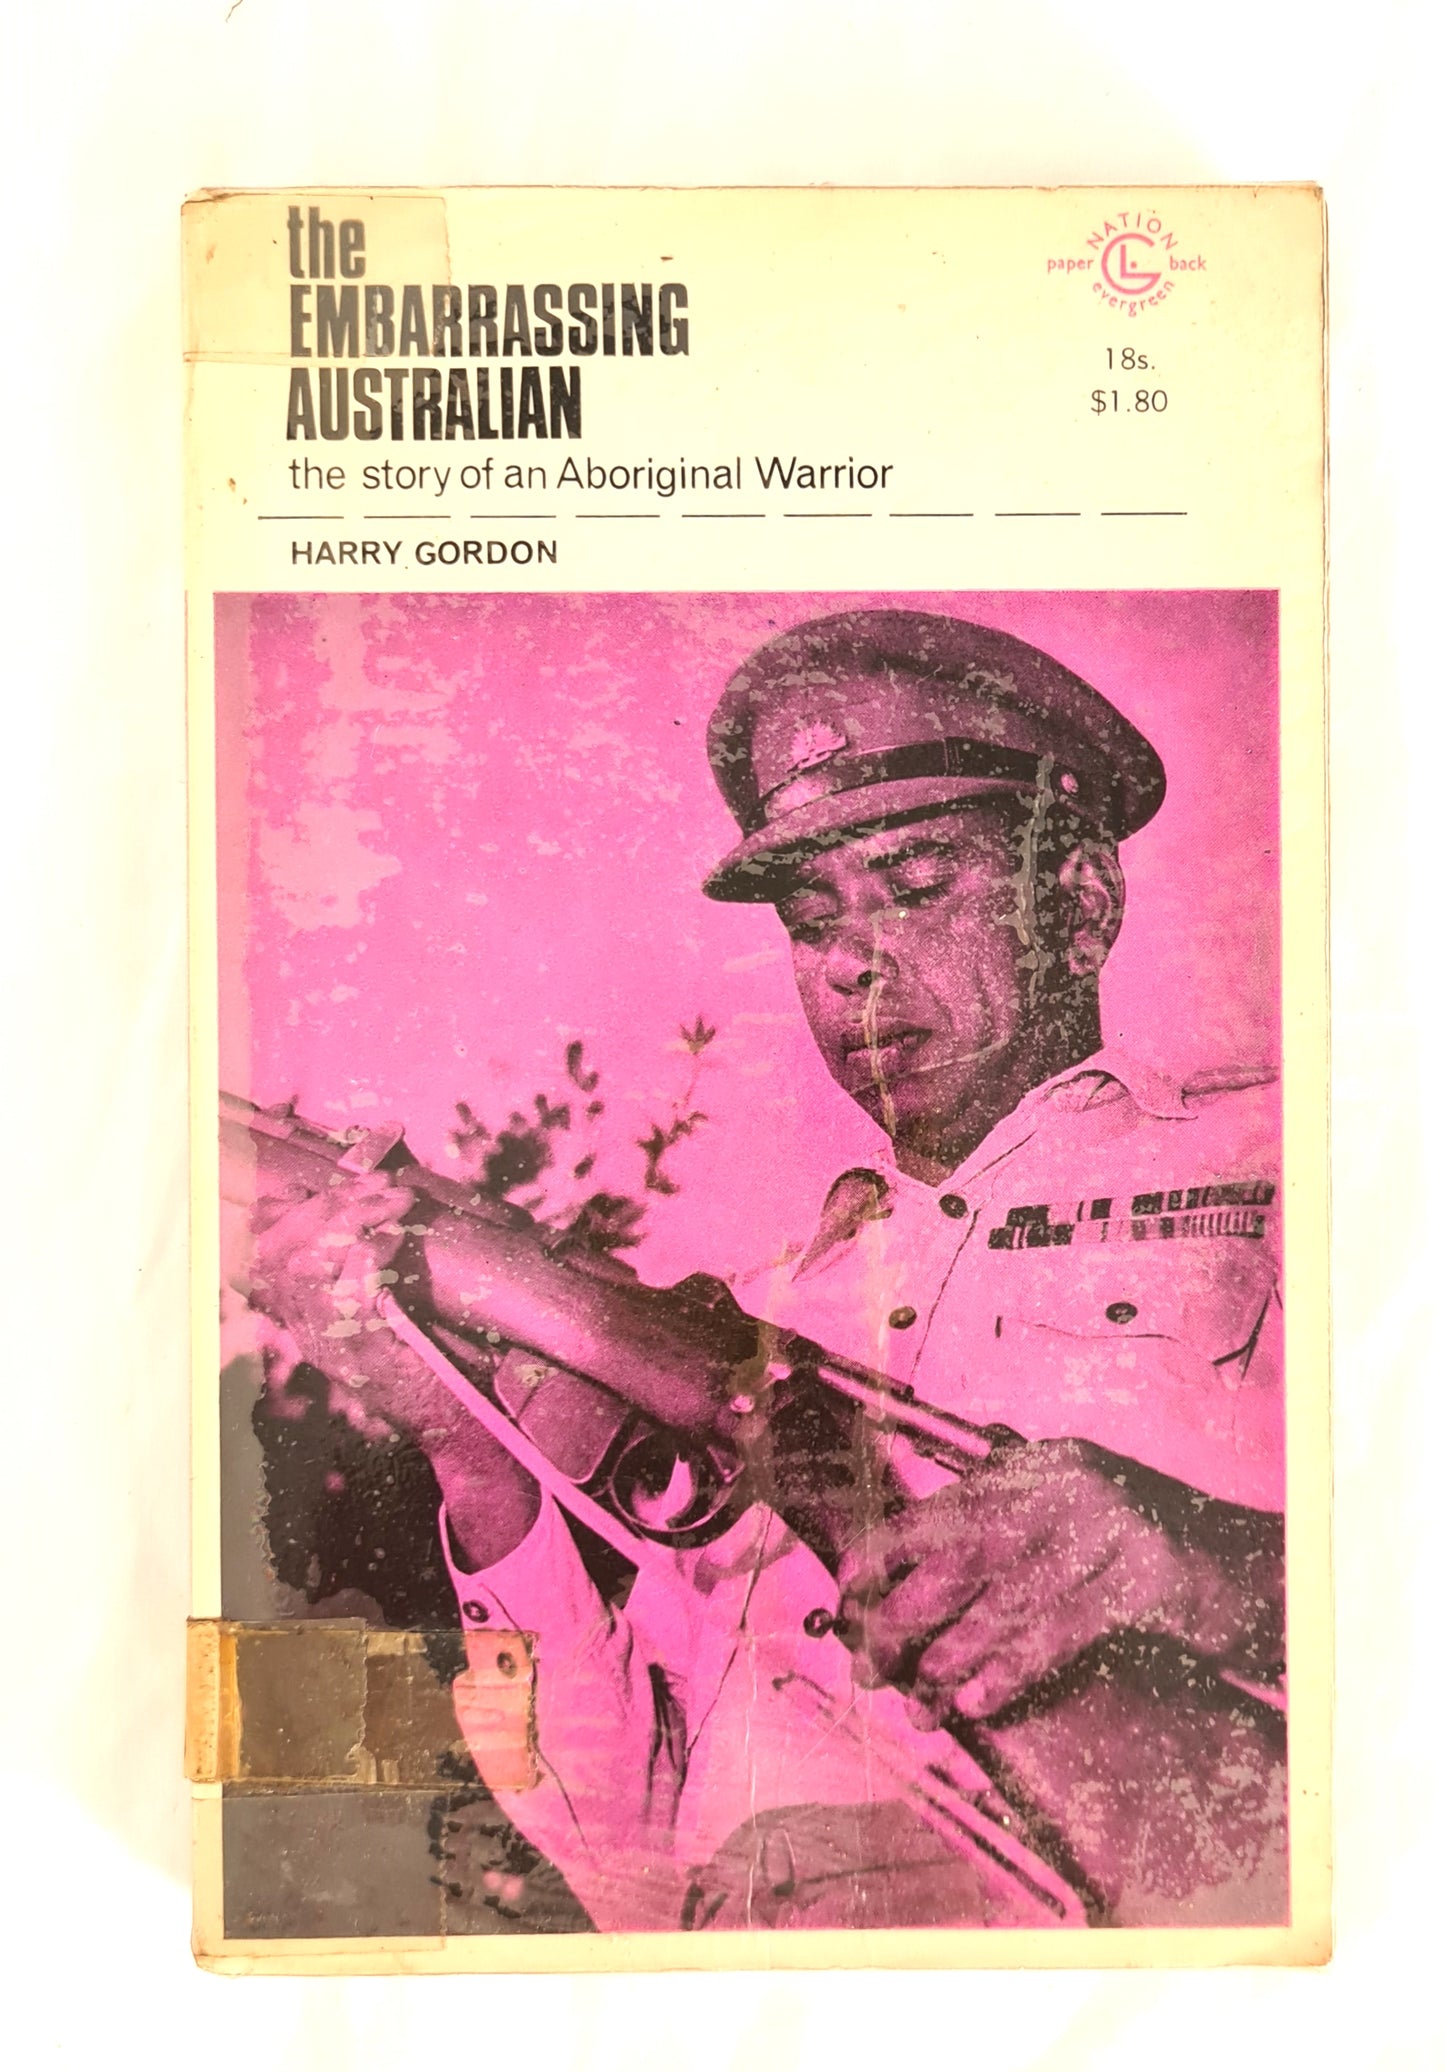 The Embarrassing Australian  The story of an Aboriginal Warrior  by Harry Gordon